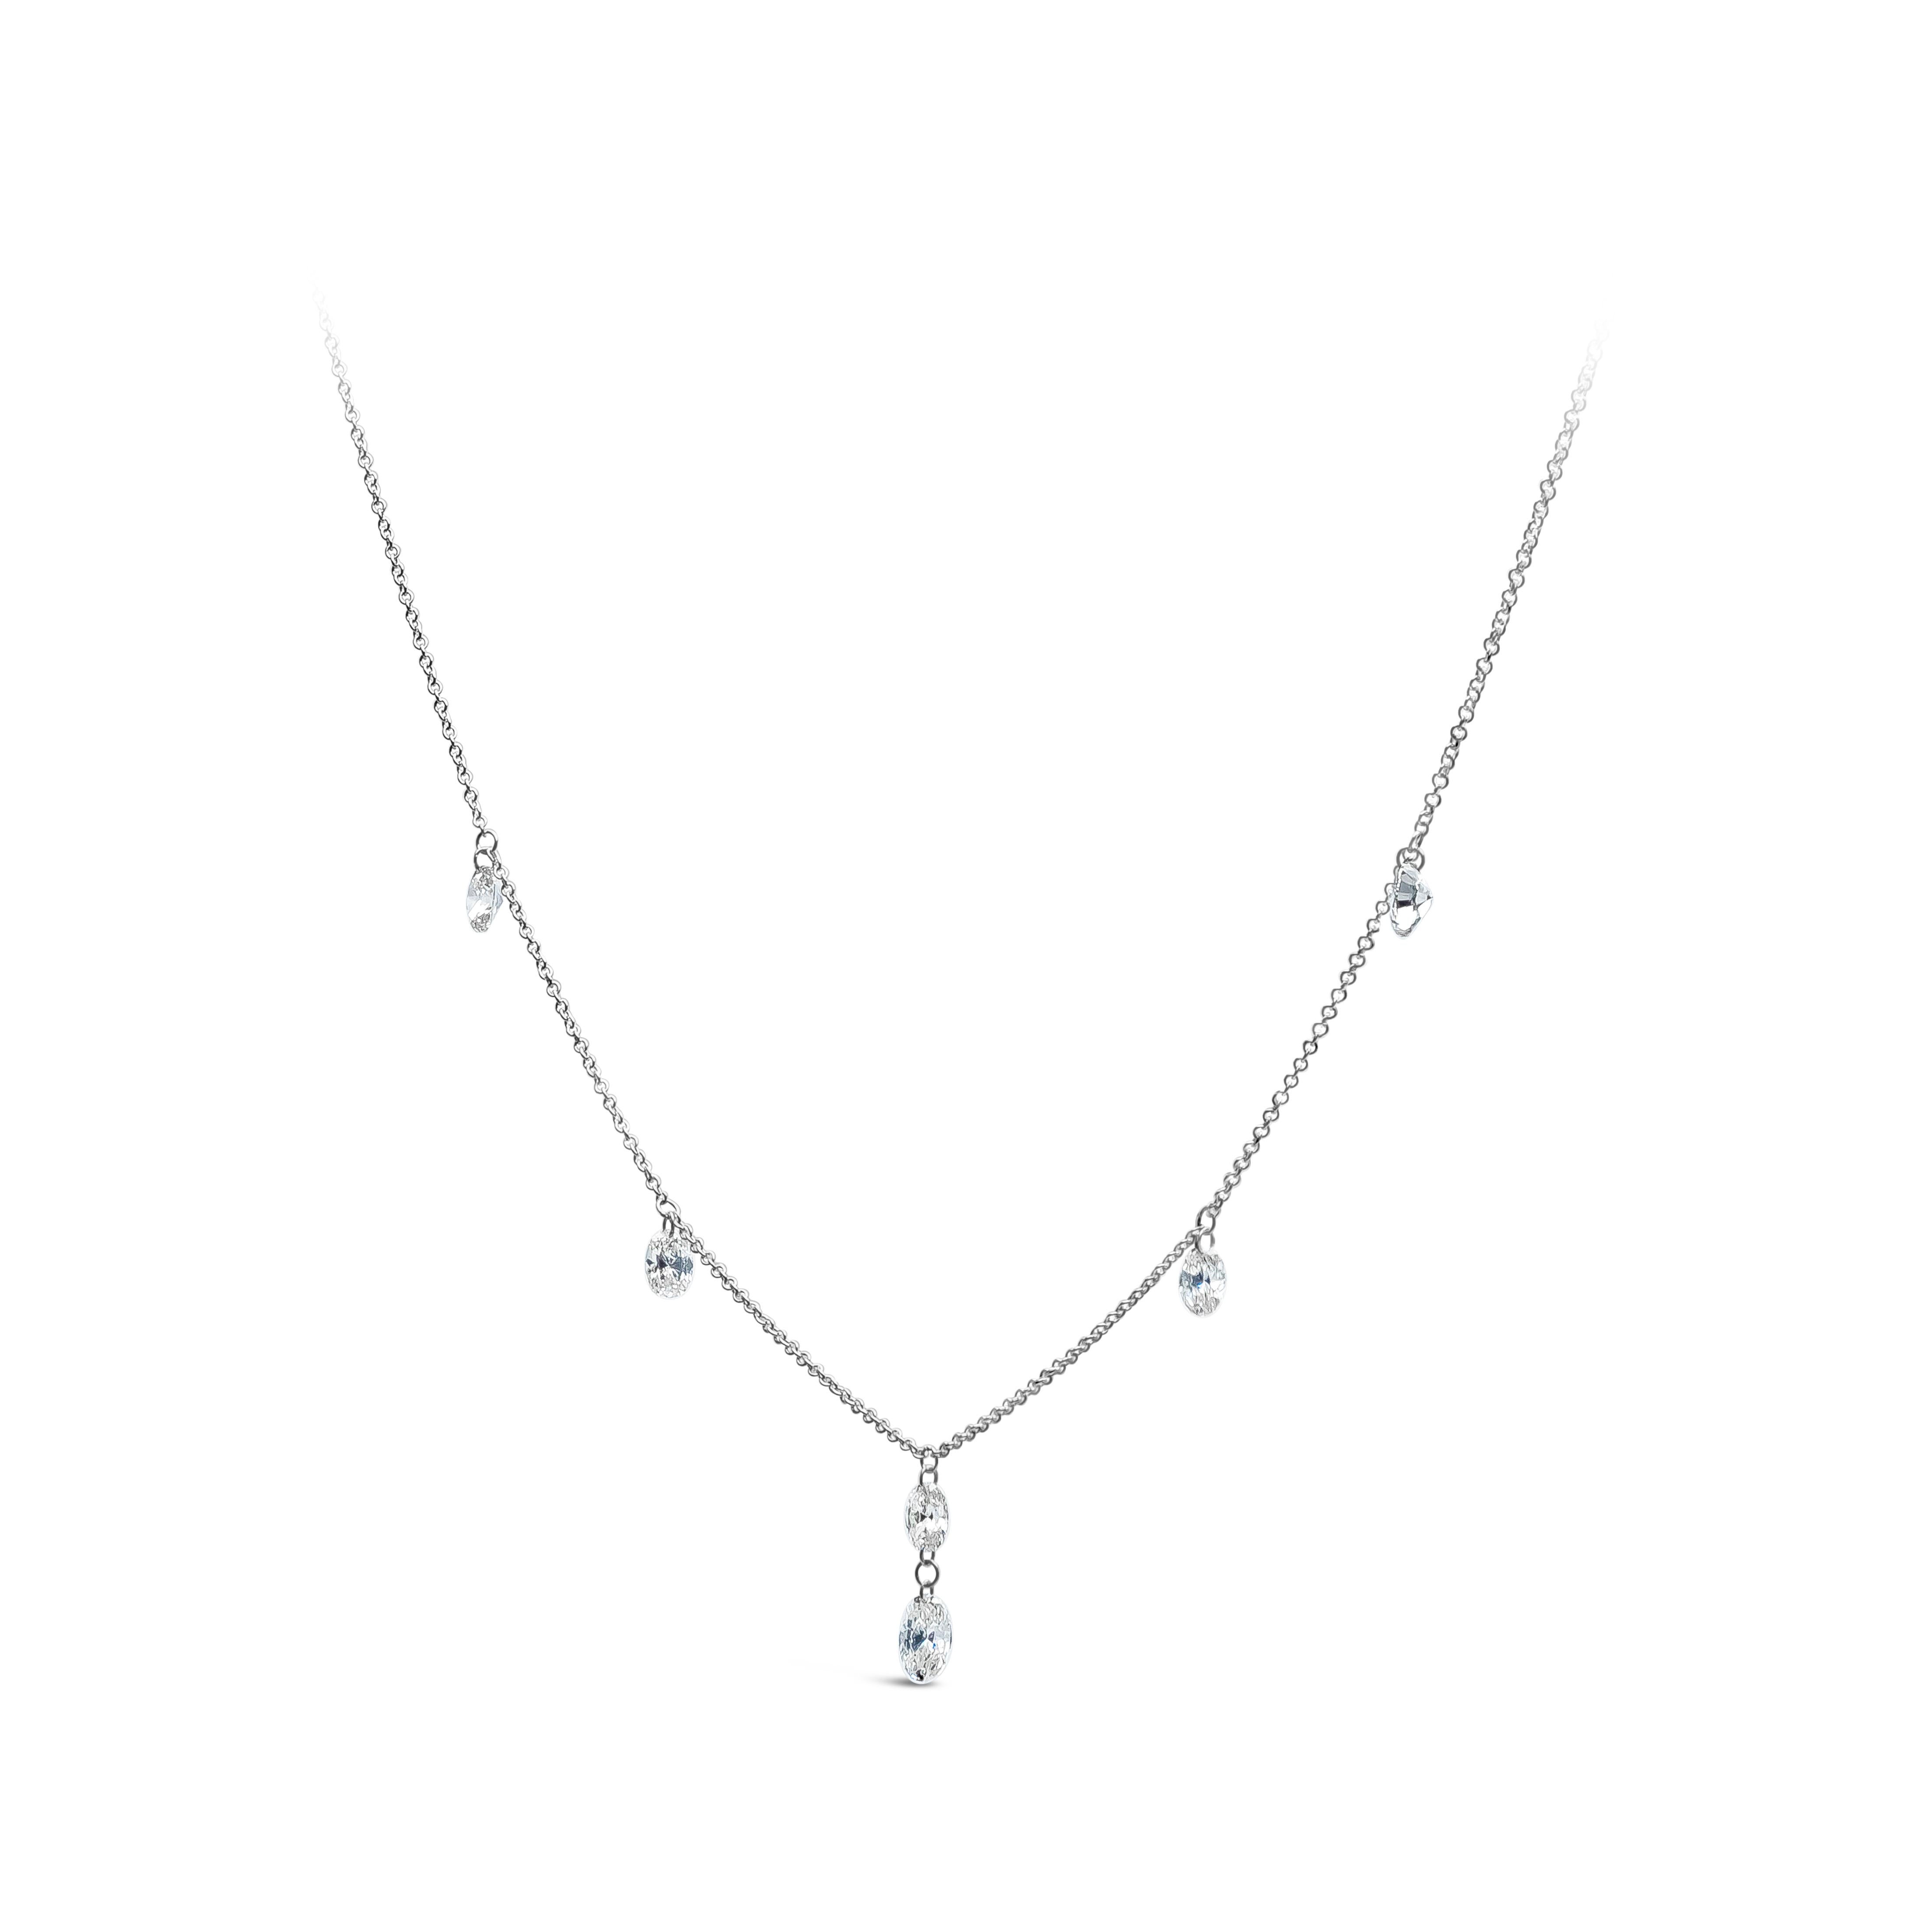 A unique and chic fashion necklace showcasing 2.01 carat total made with 6 pieces of oval cut brilliant diamonds, H-I Color, VS-SI in Clarity, single drilled and attached by 18K White Gold chain. 18 inches in Length, adjustable chain. 

Style